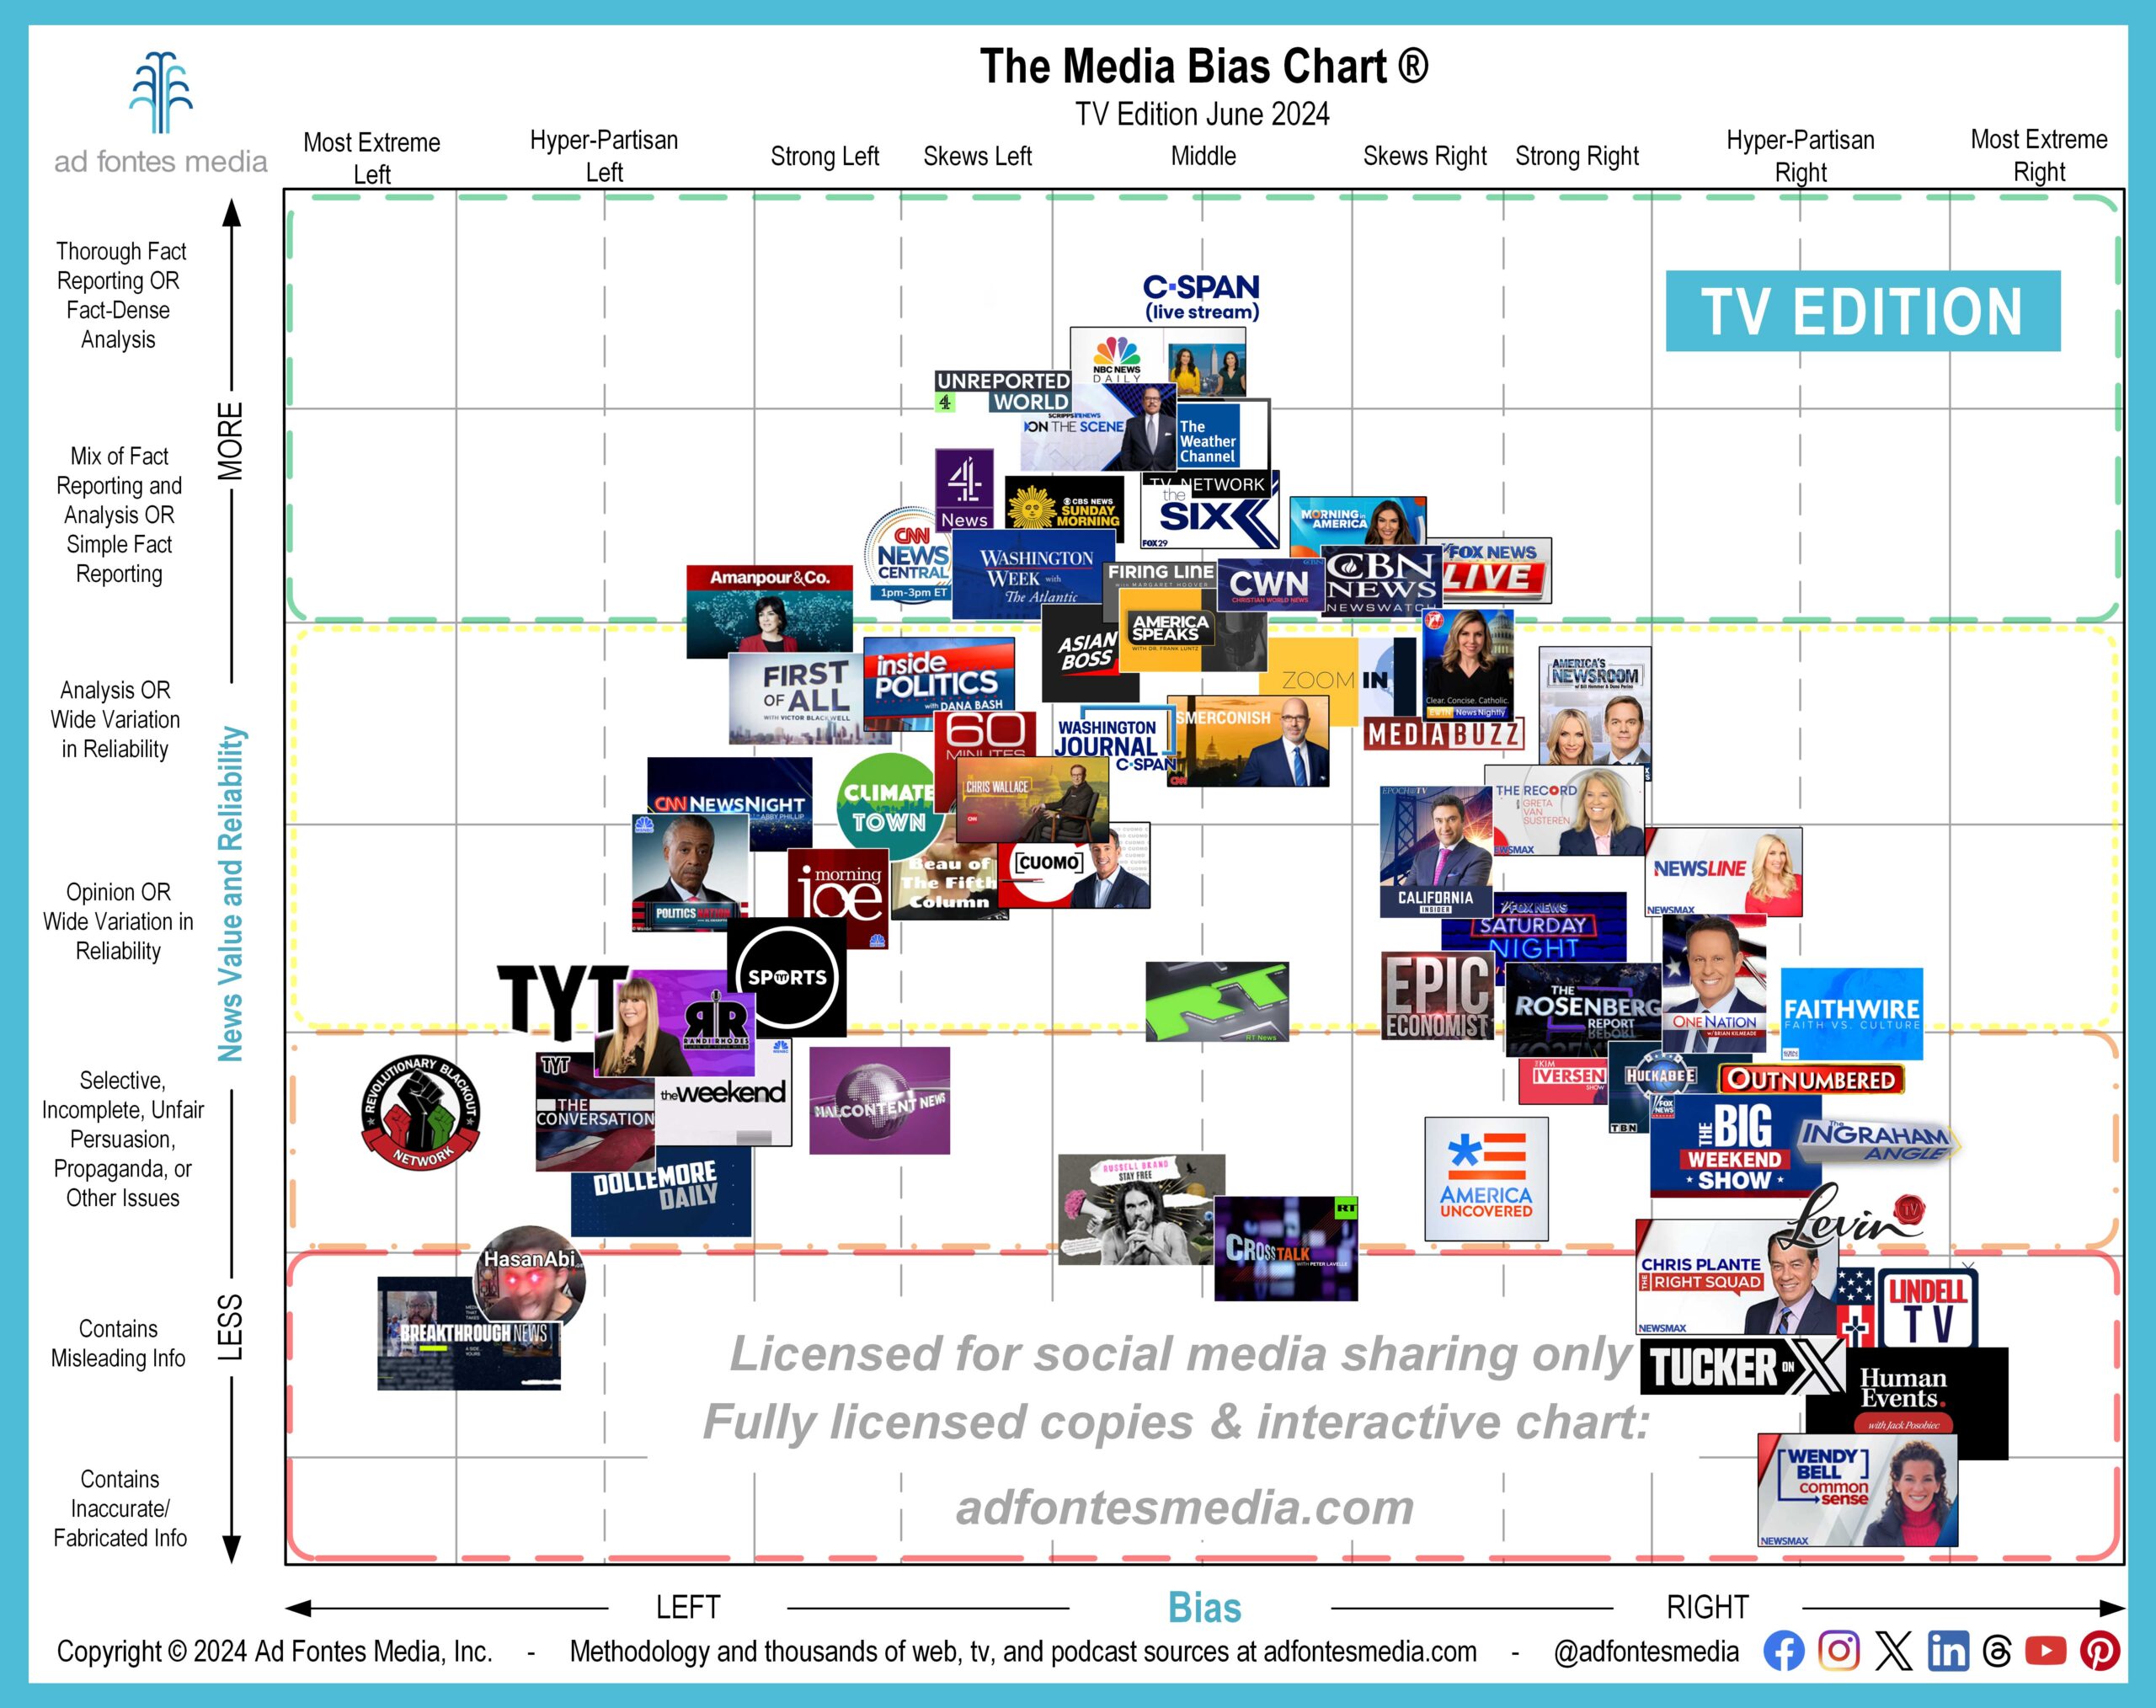 June Media Bias Chart for TV/Video Features 66 Sources, 8 of Them for the First Time